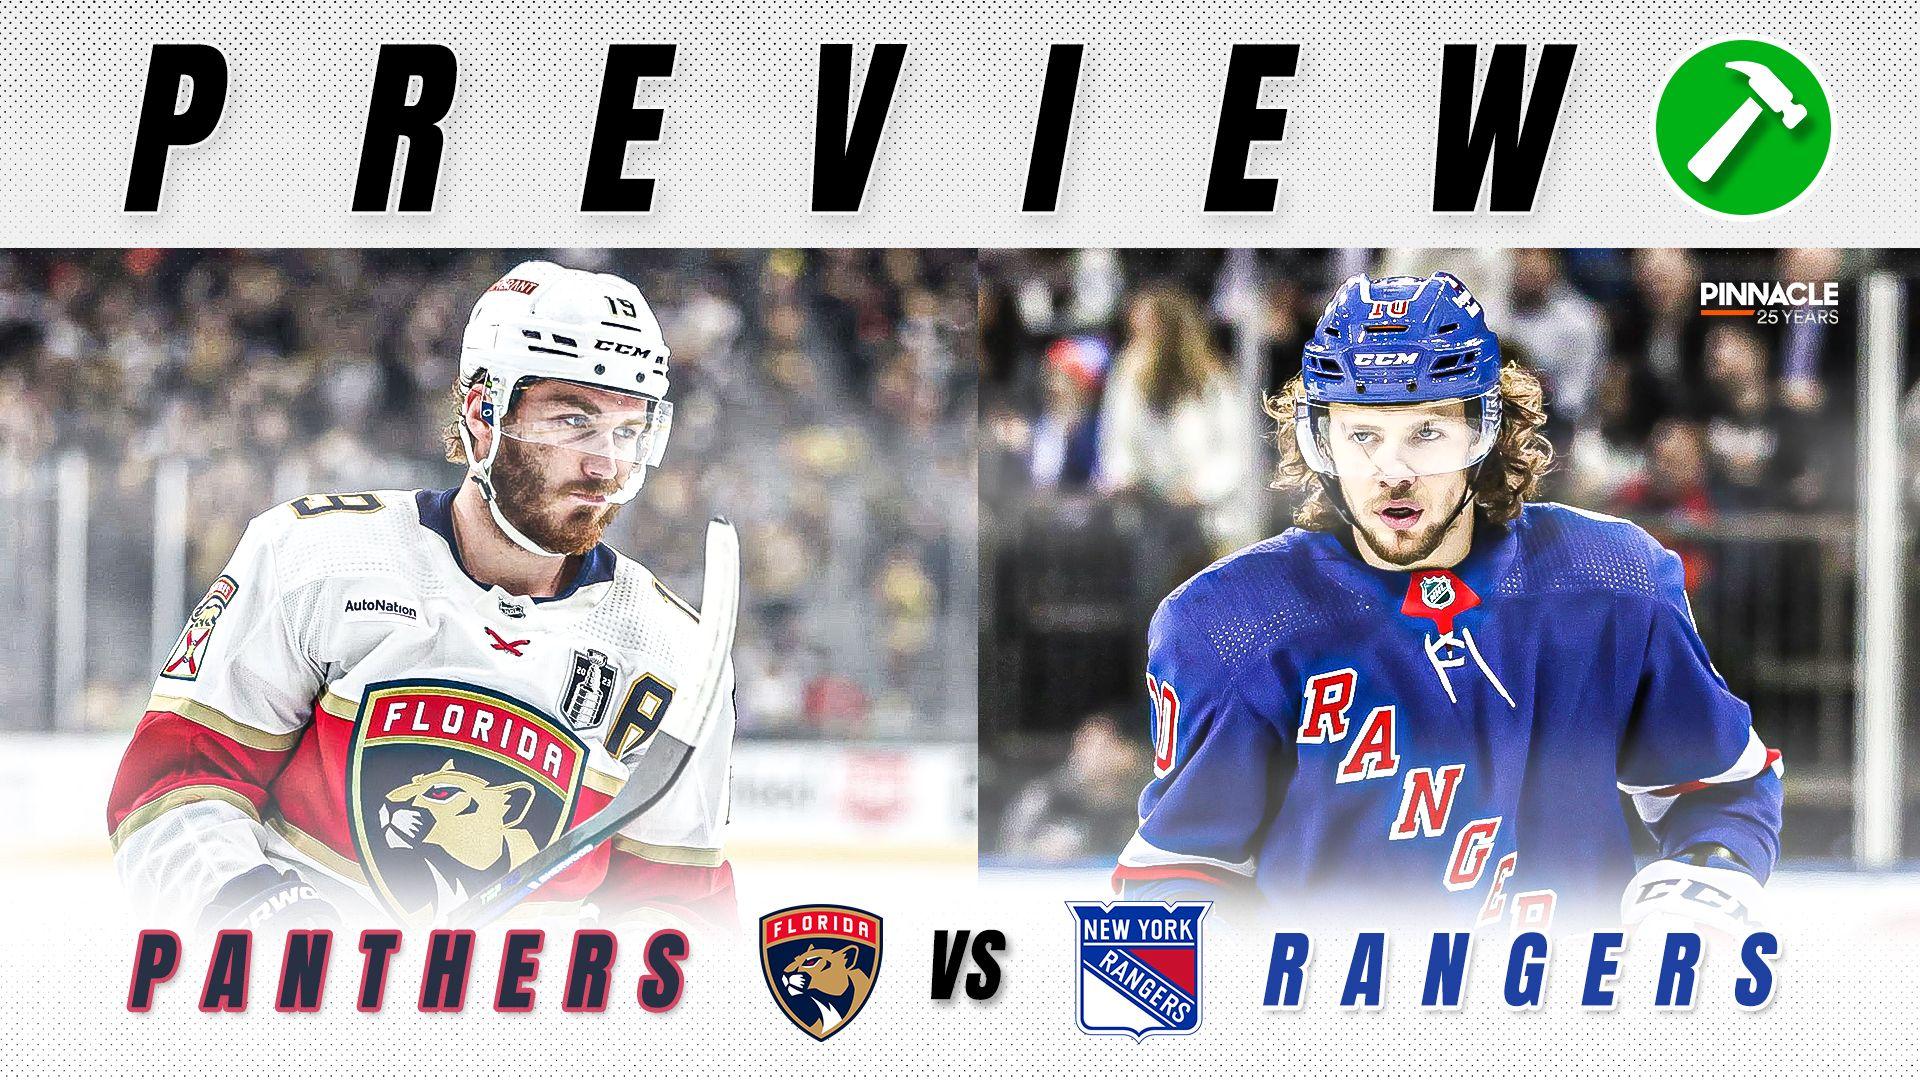 Panthers_Rangers Preview Thumbnail.jpg